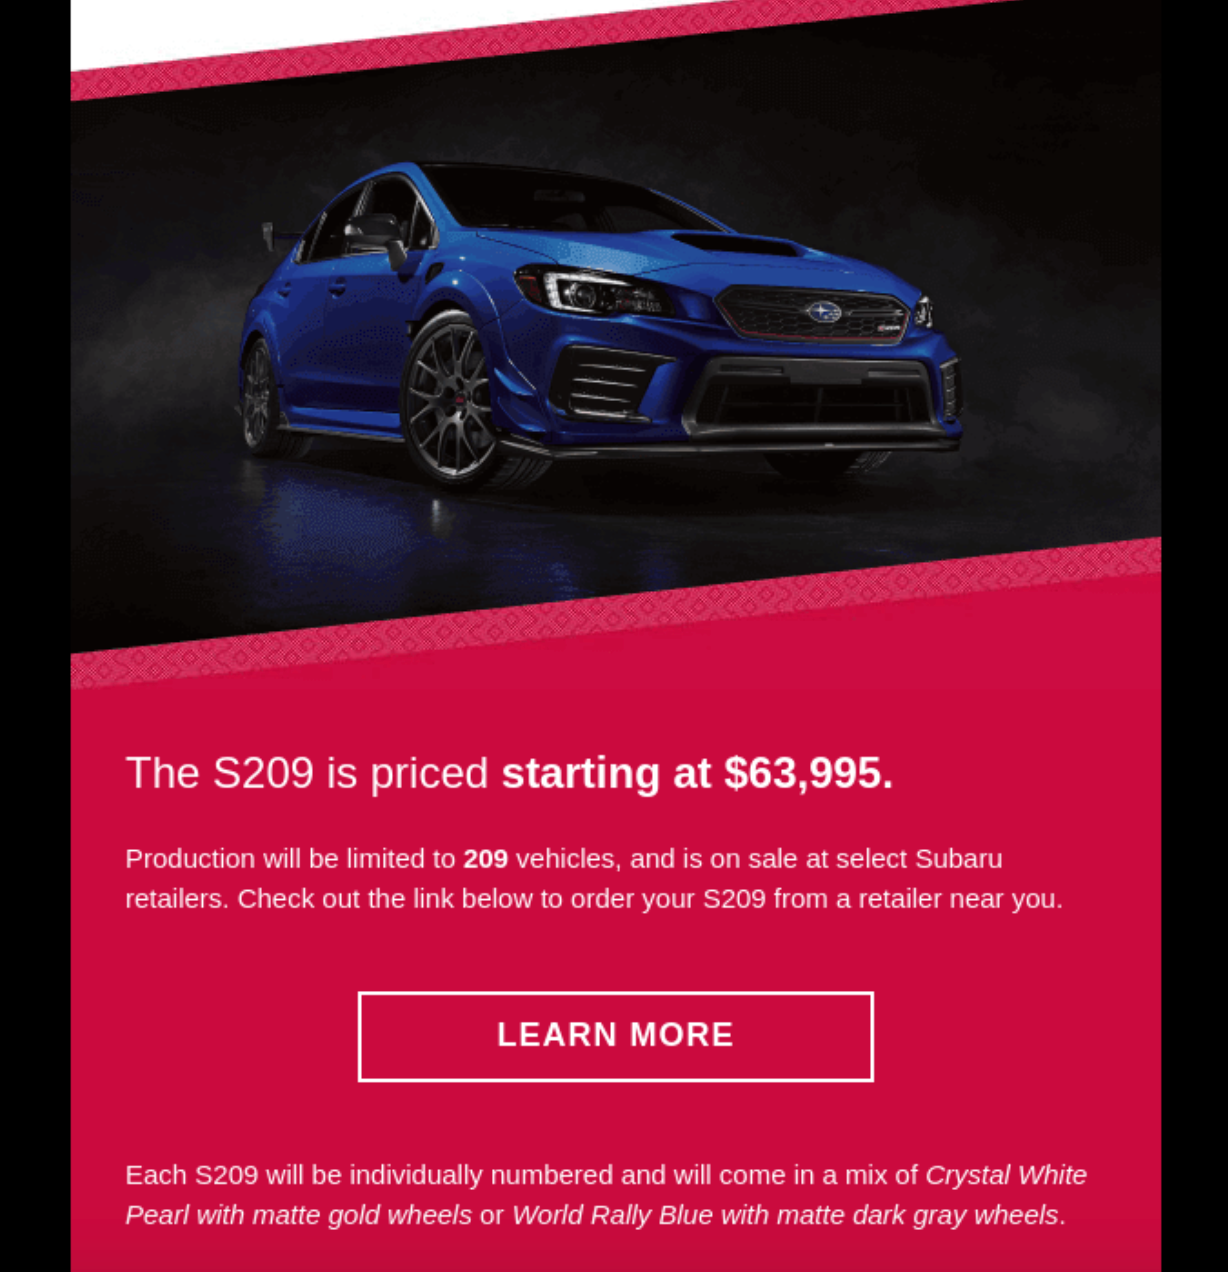 6-of-the-best-top-automotive-email-examples-we-ve-seen